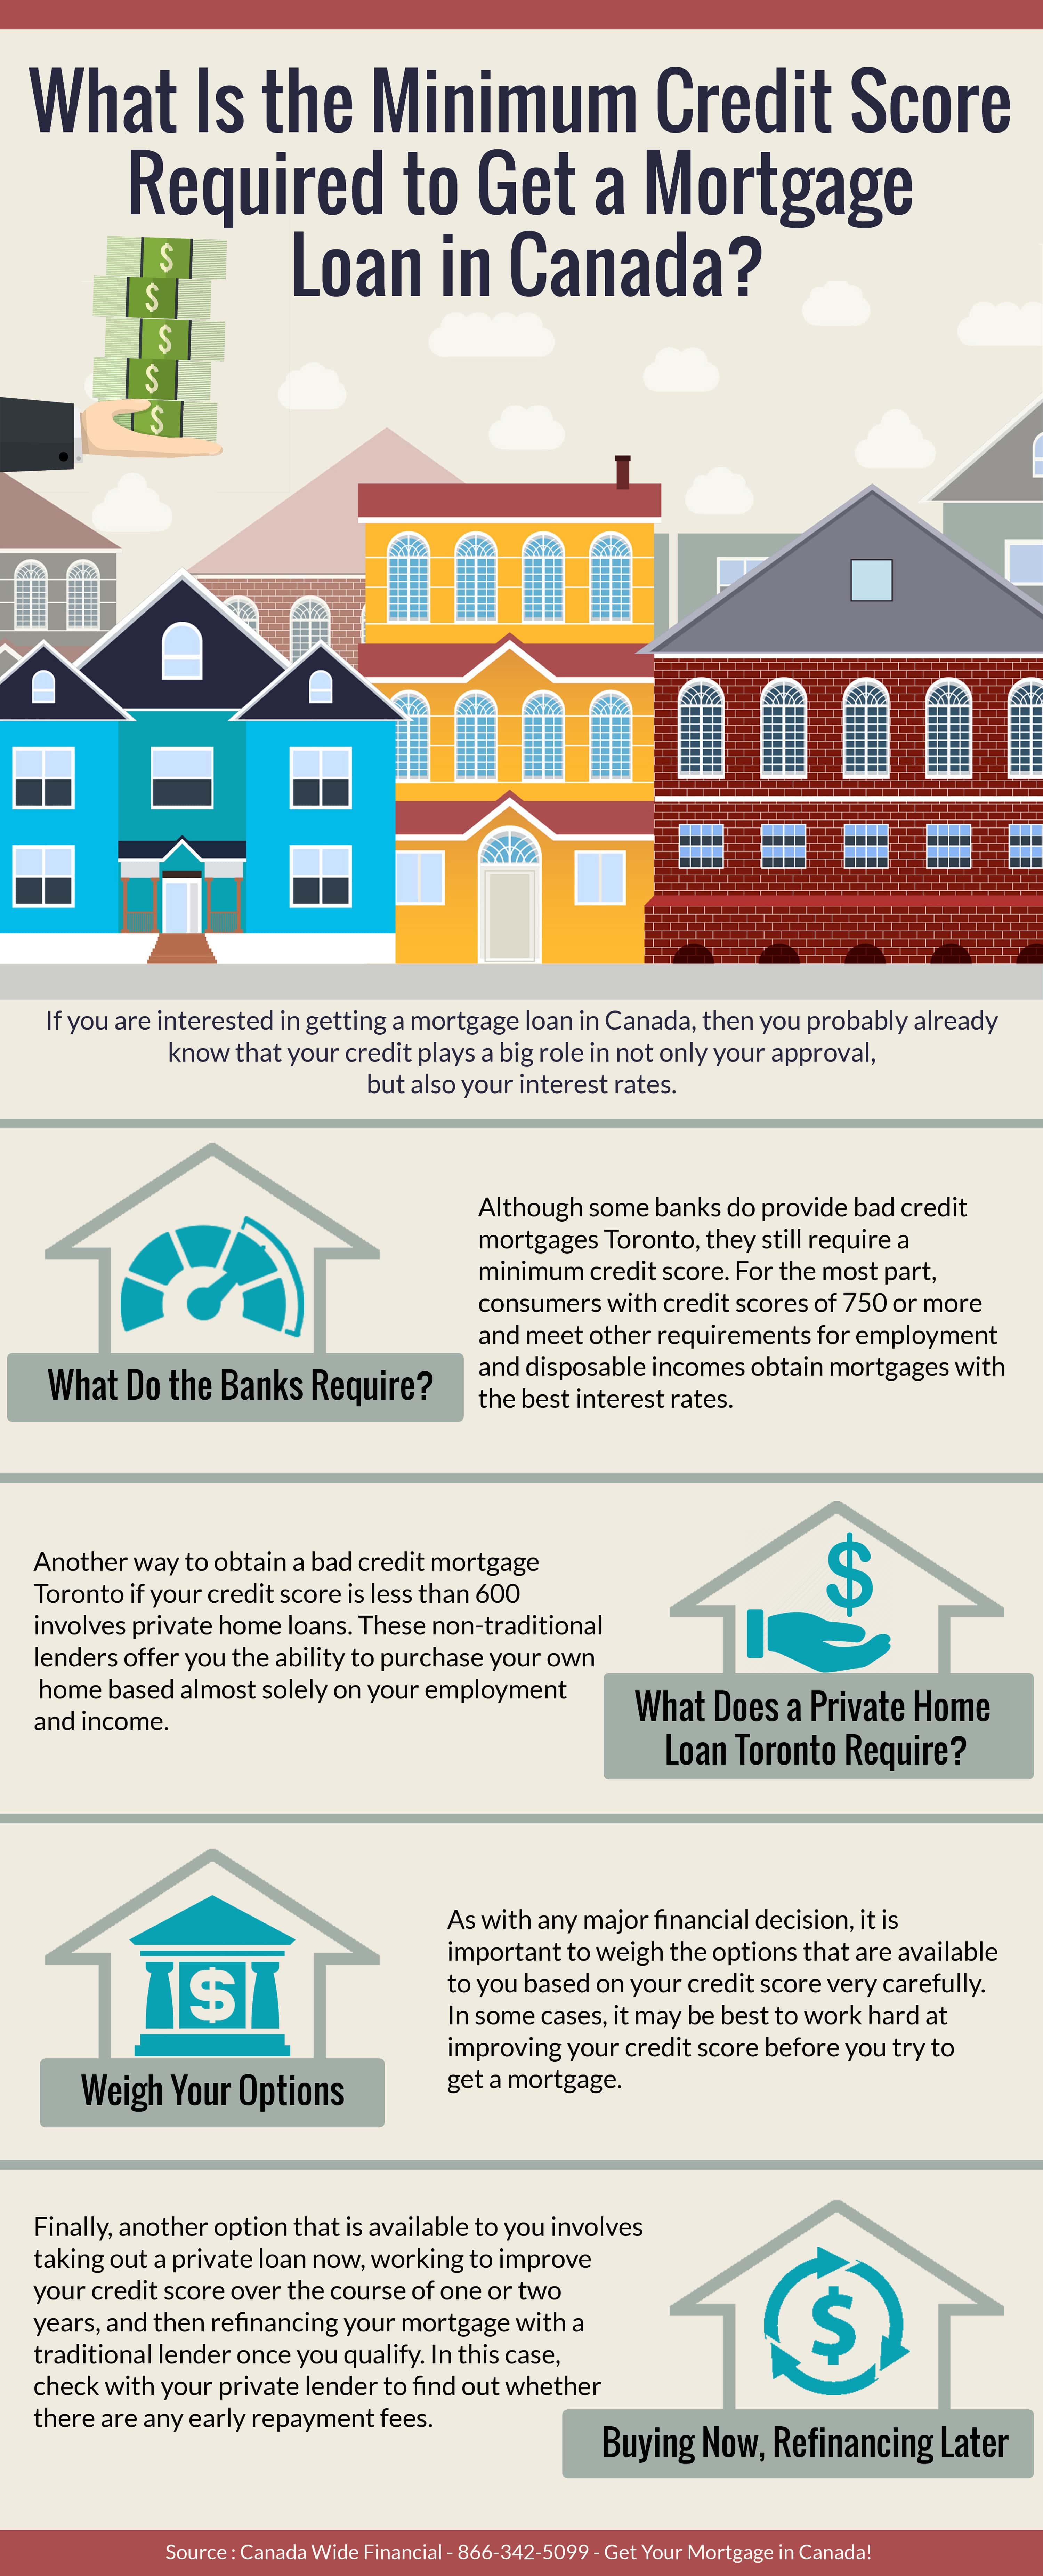 Minimum Credit Score Required to Get a Mortgage Loan in Canada - Infographic